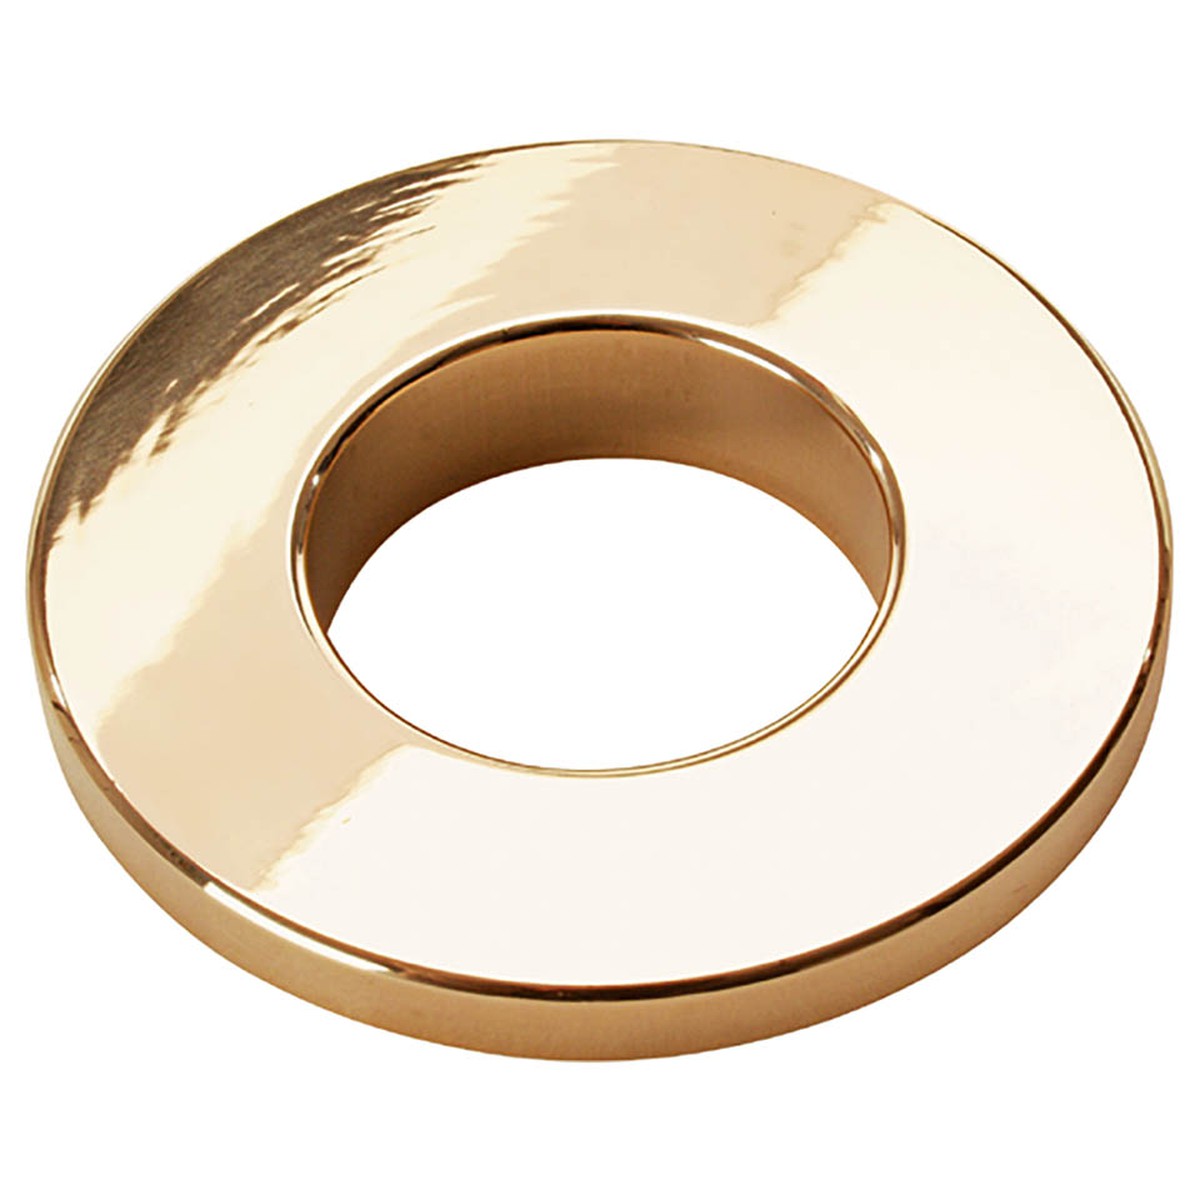 Barlow Tyrie Parasol Parasol Hole Reducer Ring 38mm - brass  